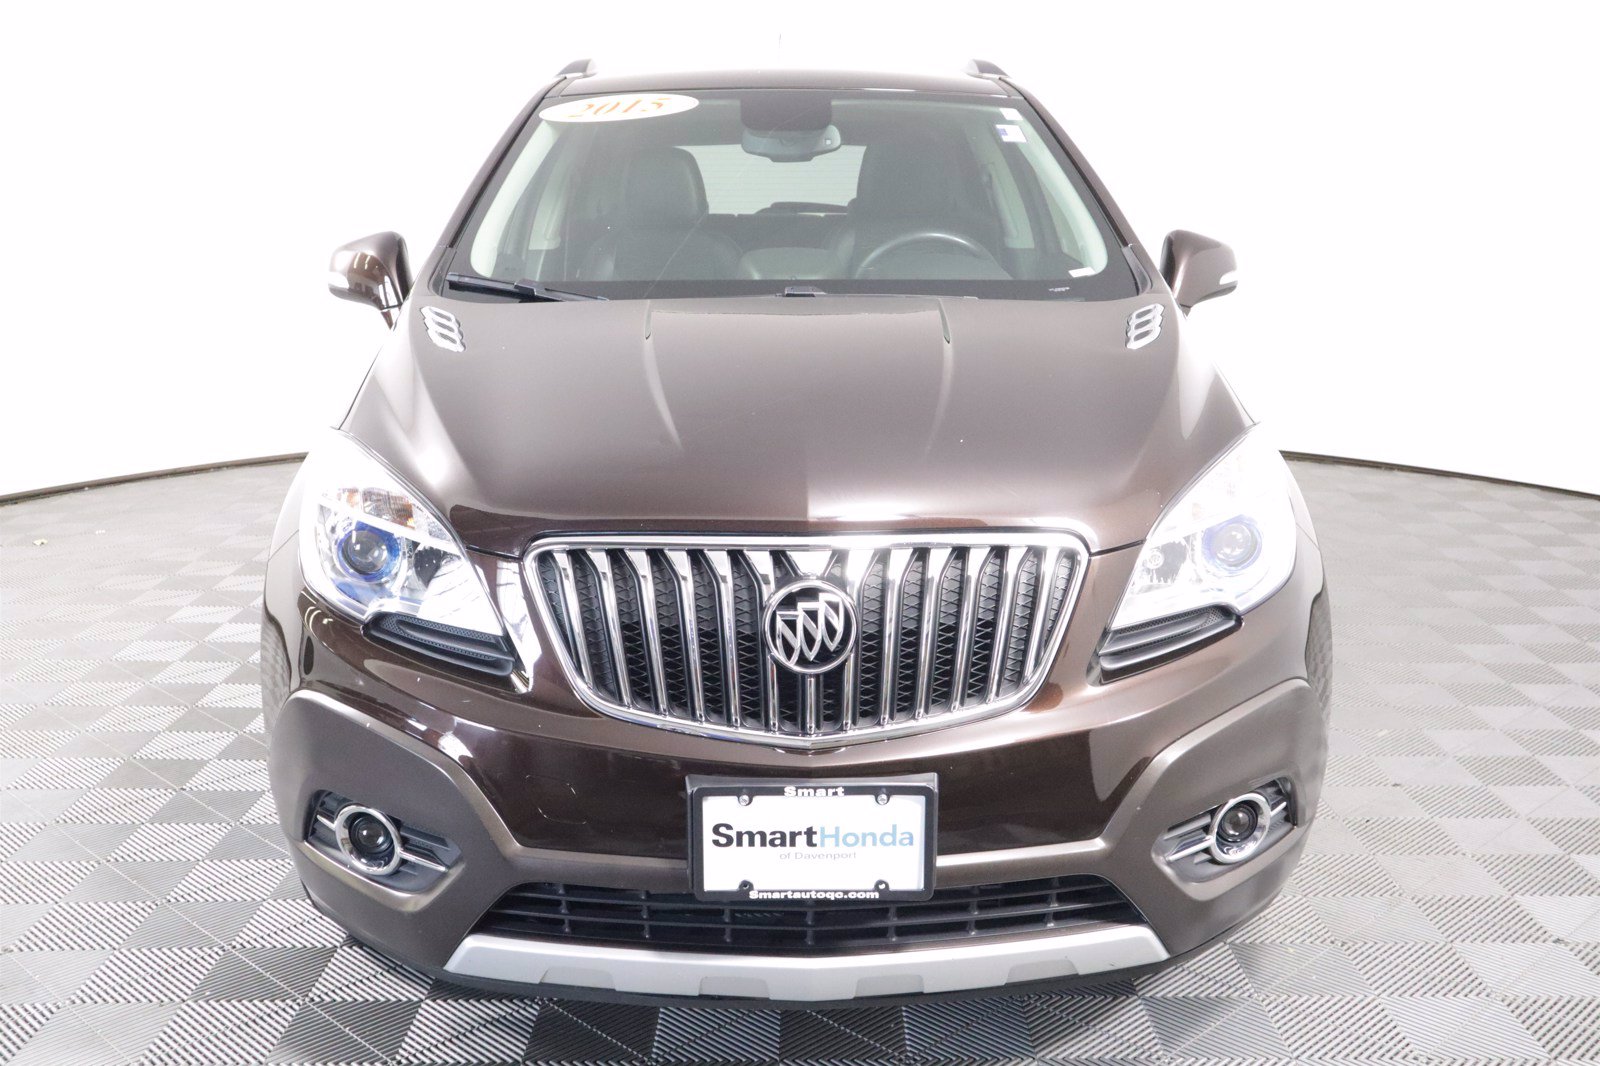 2013 buick encore for sale ontario